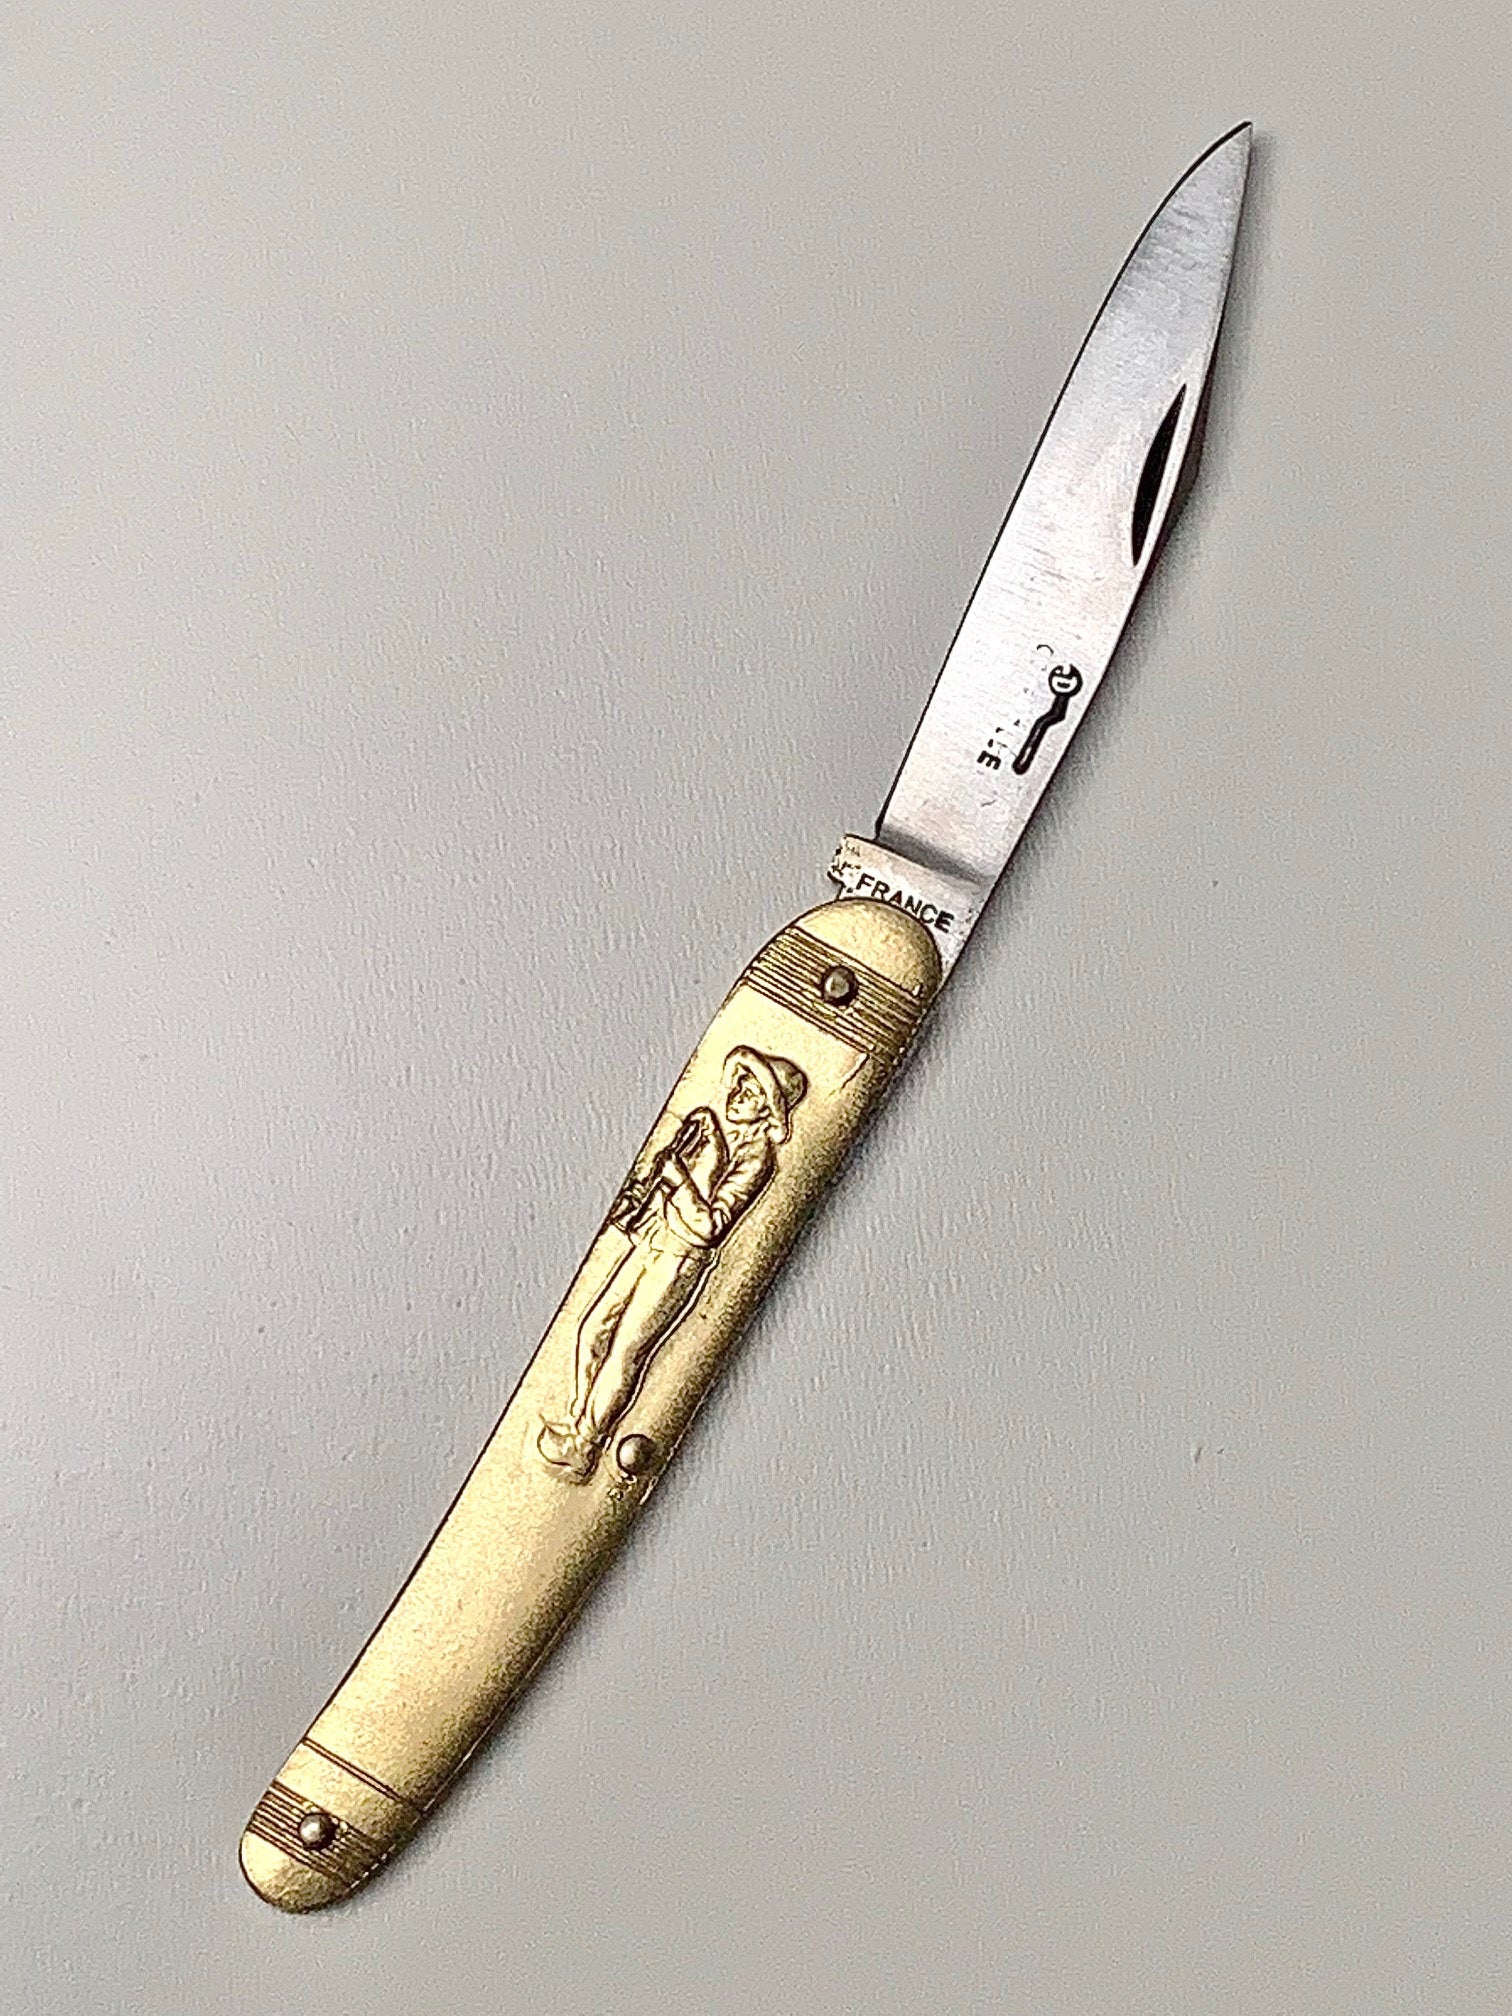 Couperier Coursolle Brass 80mm Single Blade Pocket Knife - Woman + Young Boy Wearing Hat in Wooden Box - Pocket Knives - Couperier Coursolle - Brand_Couperier Coursolle - Kitchen_Dinnerware - Kitchen_Kitchenware - Knife Sets - Laguiole - Spring Collection - 7800-LAI220B_WB.2